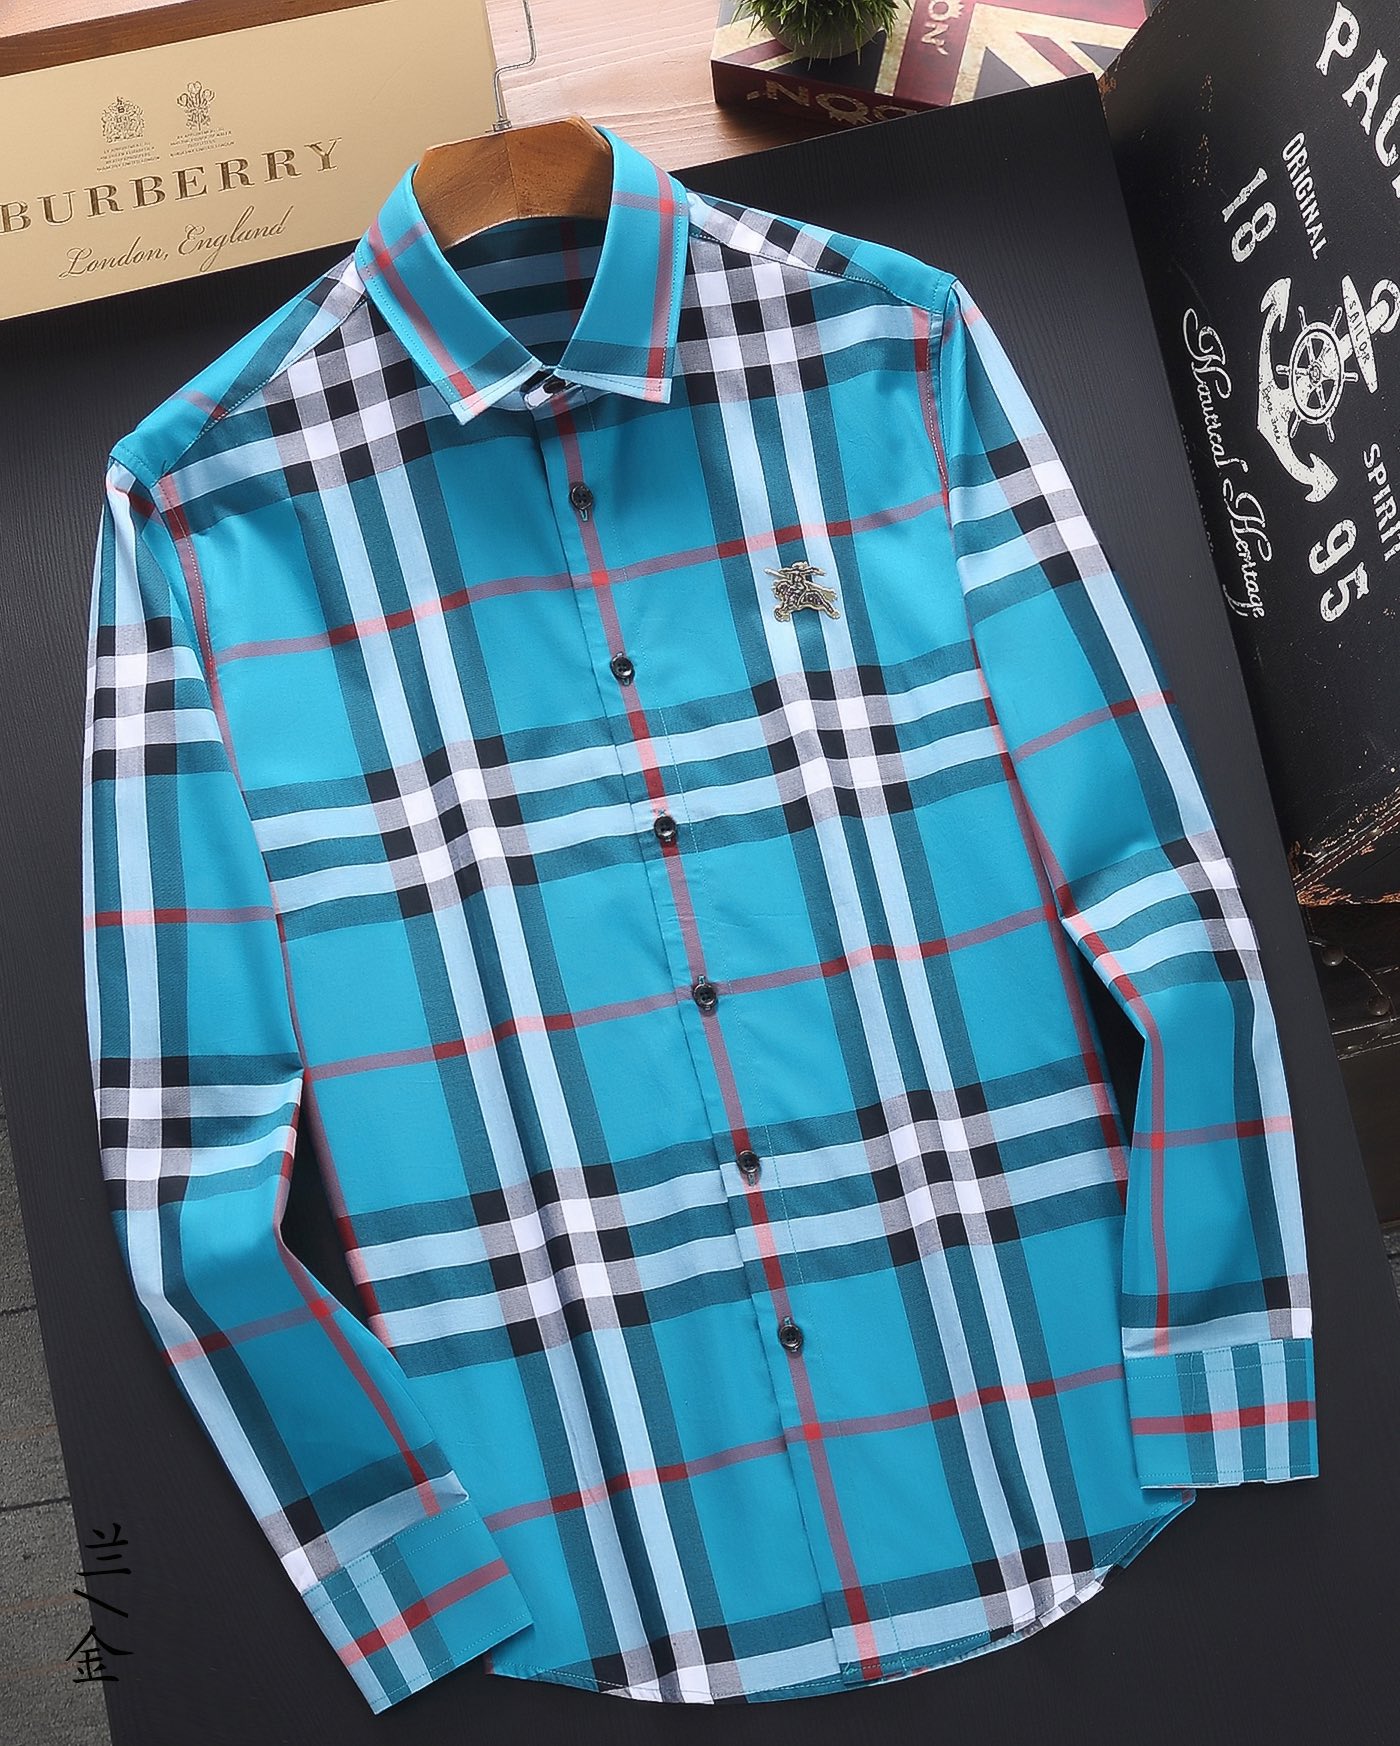 Burberry Clothing Shirts & Blouses Cotton Mercerized Summer Collection Fashion Casual